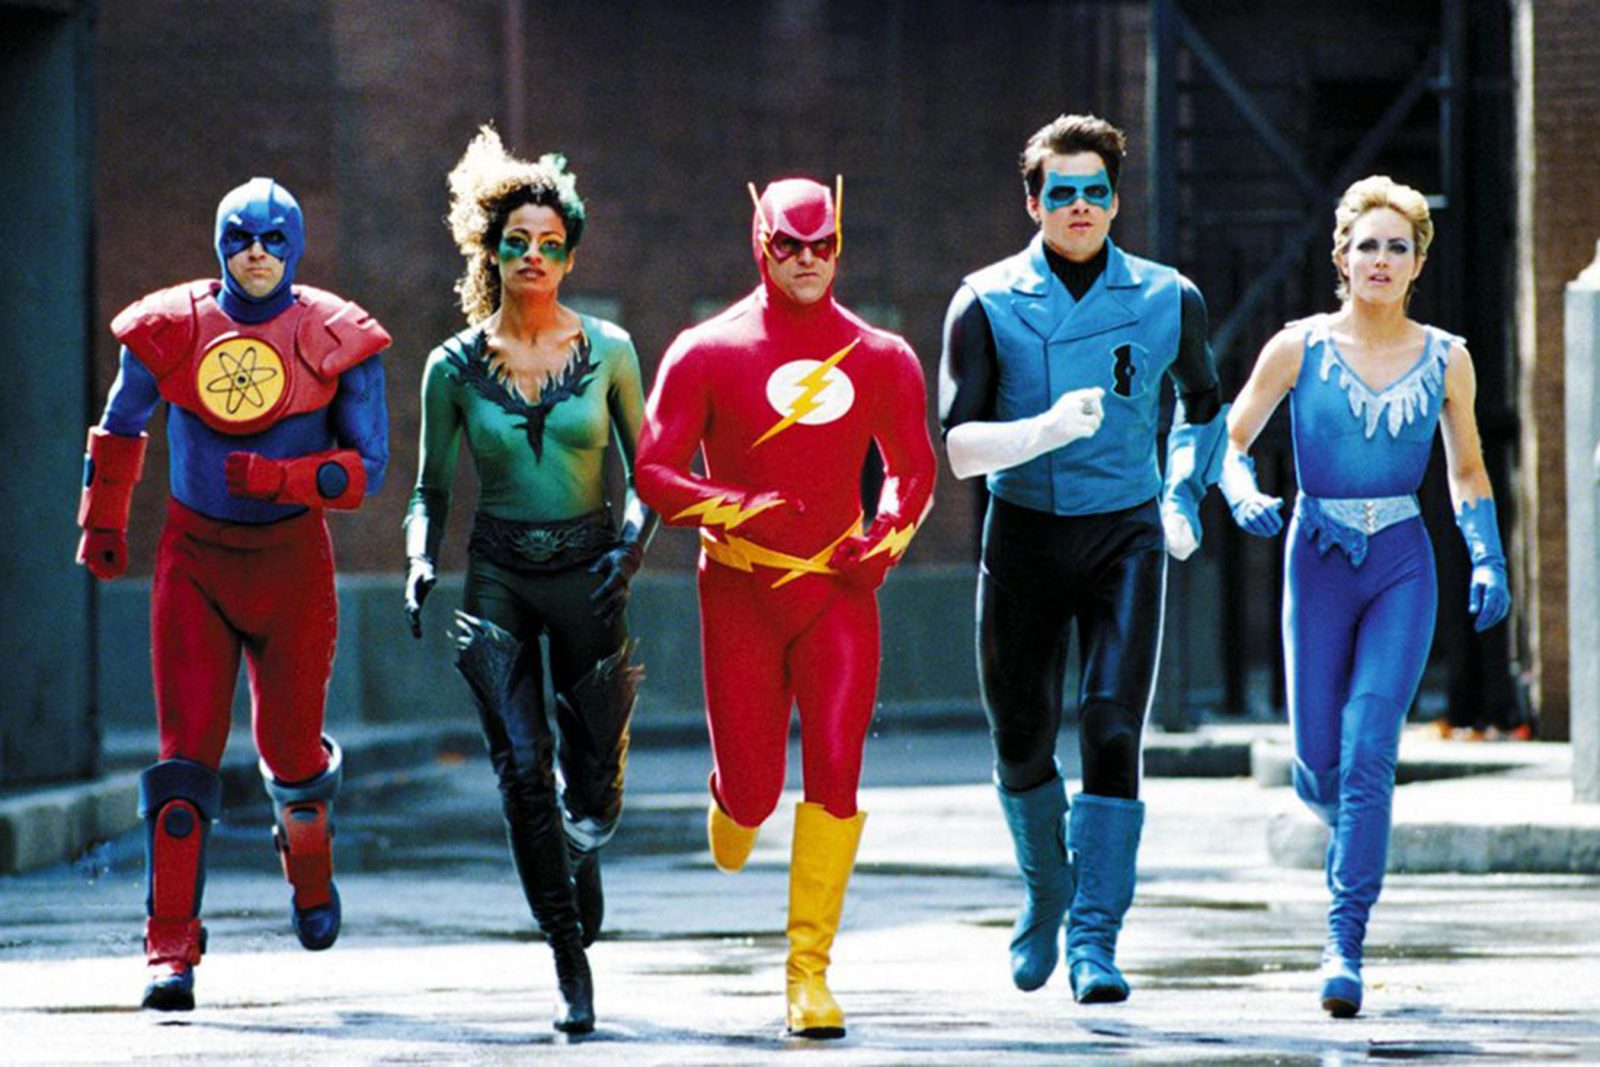 Which Three Marvel Characters Are You A Combo Of? Justice League of America (1997) CR: DC